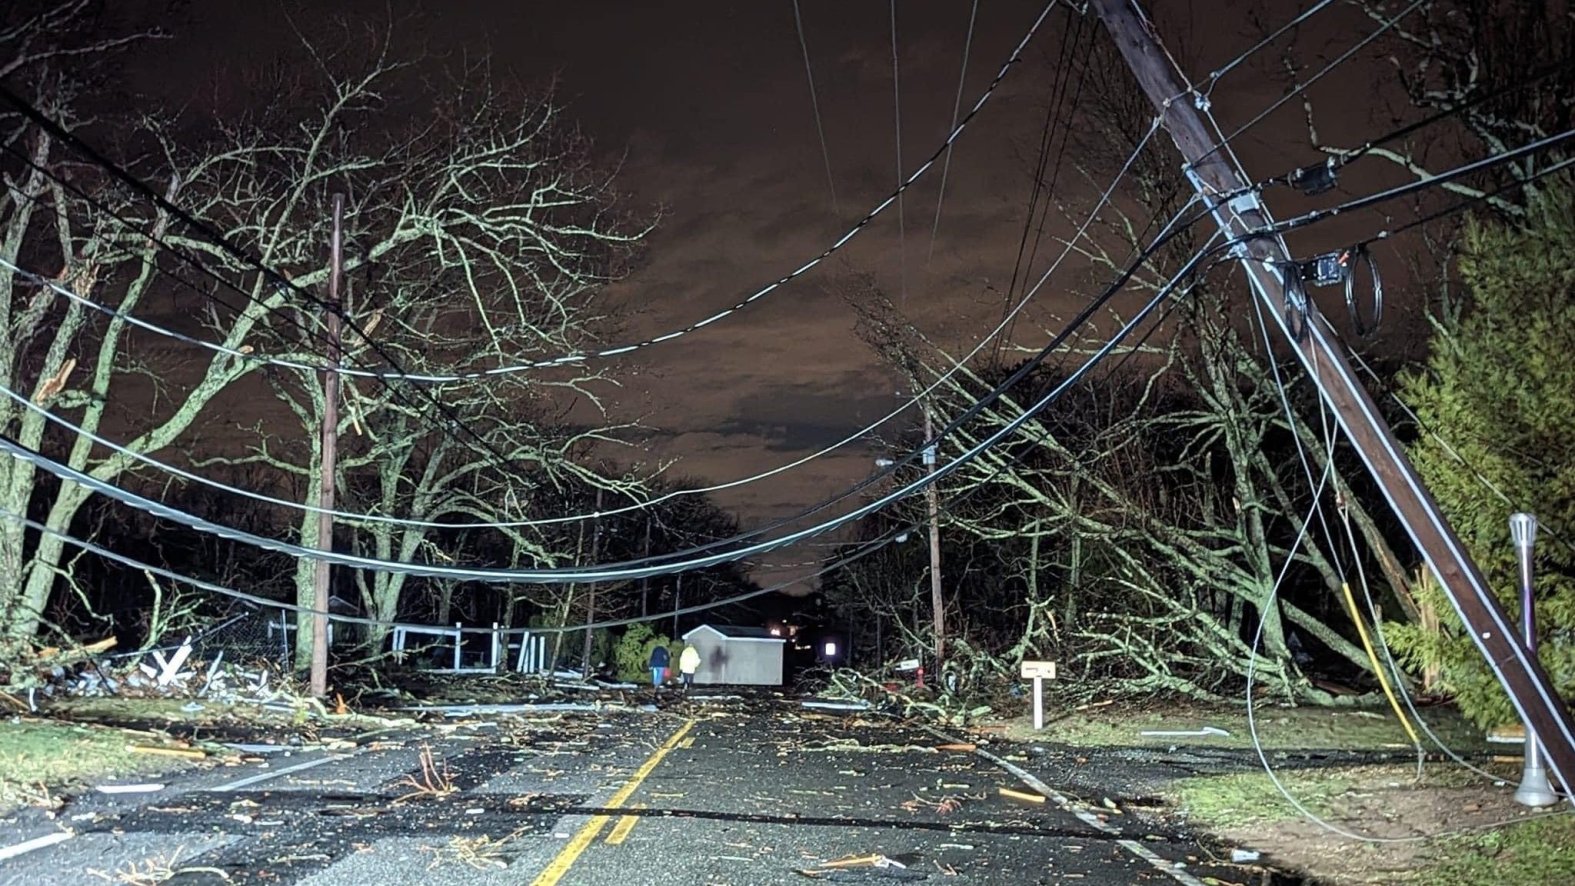 Howell, Jackson Tornadoes Confirmed in New Jersey Saturday Storms NBC